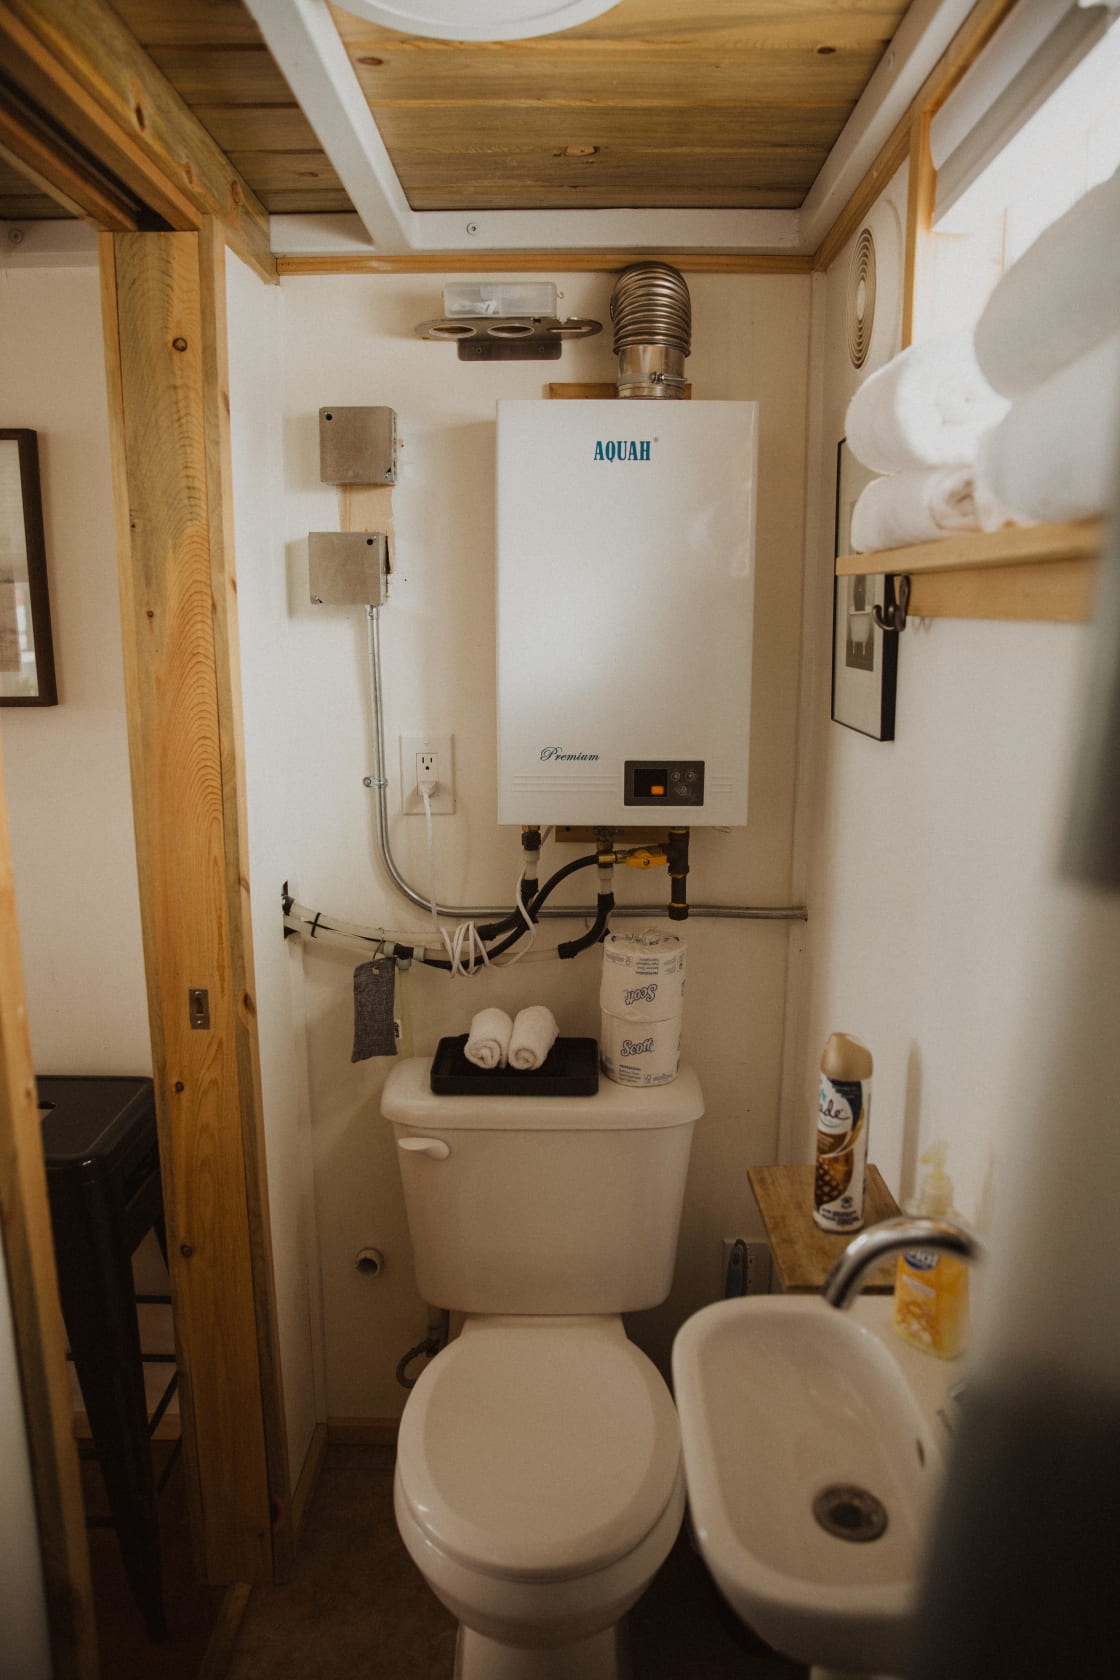 The full bathroom at the back of the tiny house. 